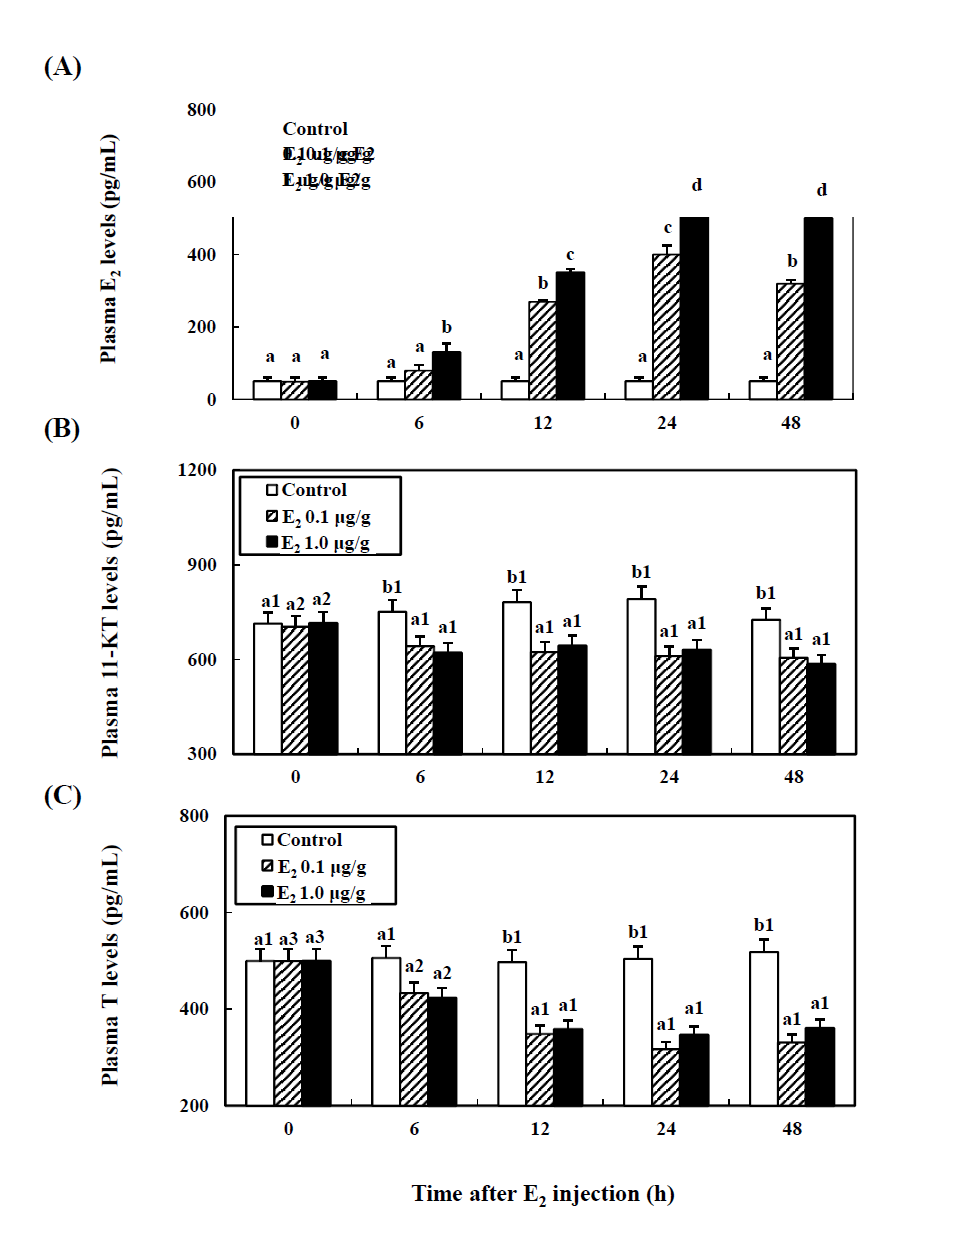 Time-course effects of the 17β-estradiol (E2) on the plasma levels of E2 (A), 11-KT (B), and T (C) in the cinnamon clownfish using a plate reader.